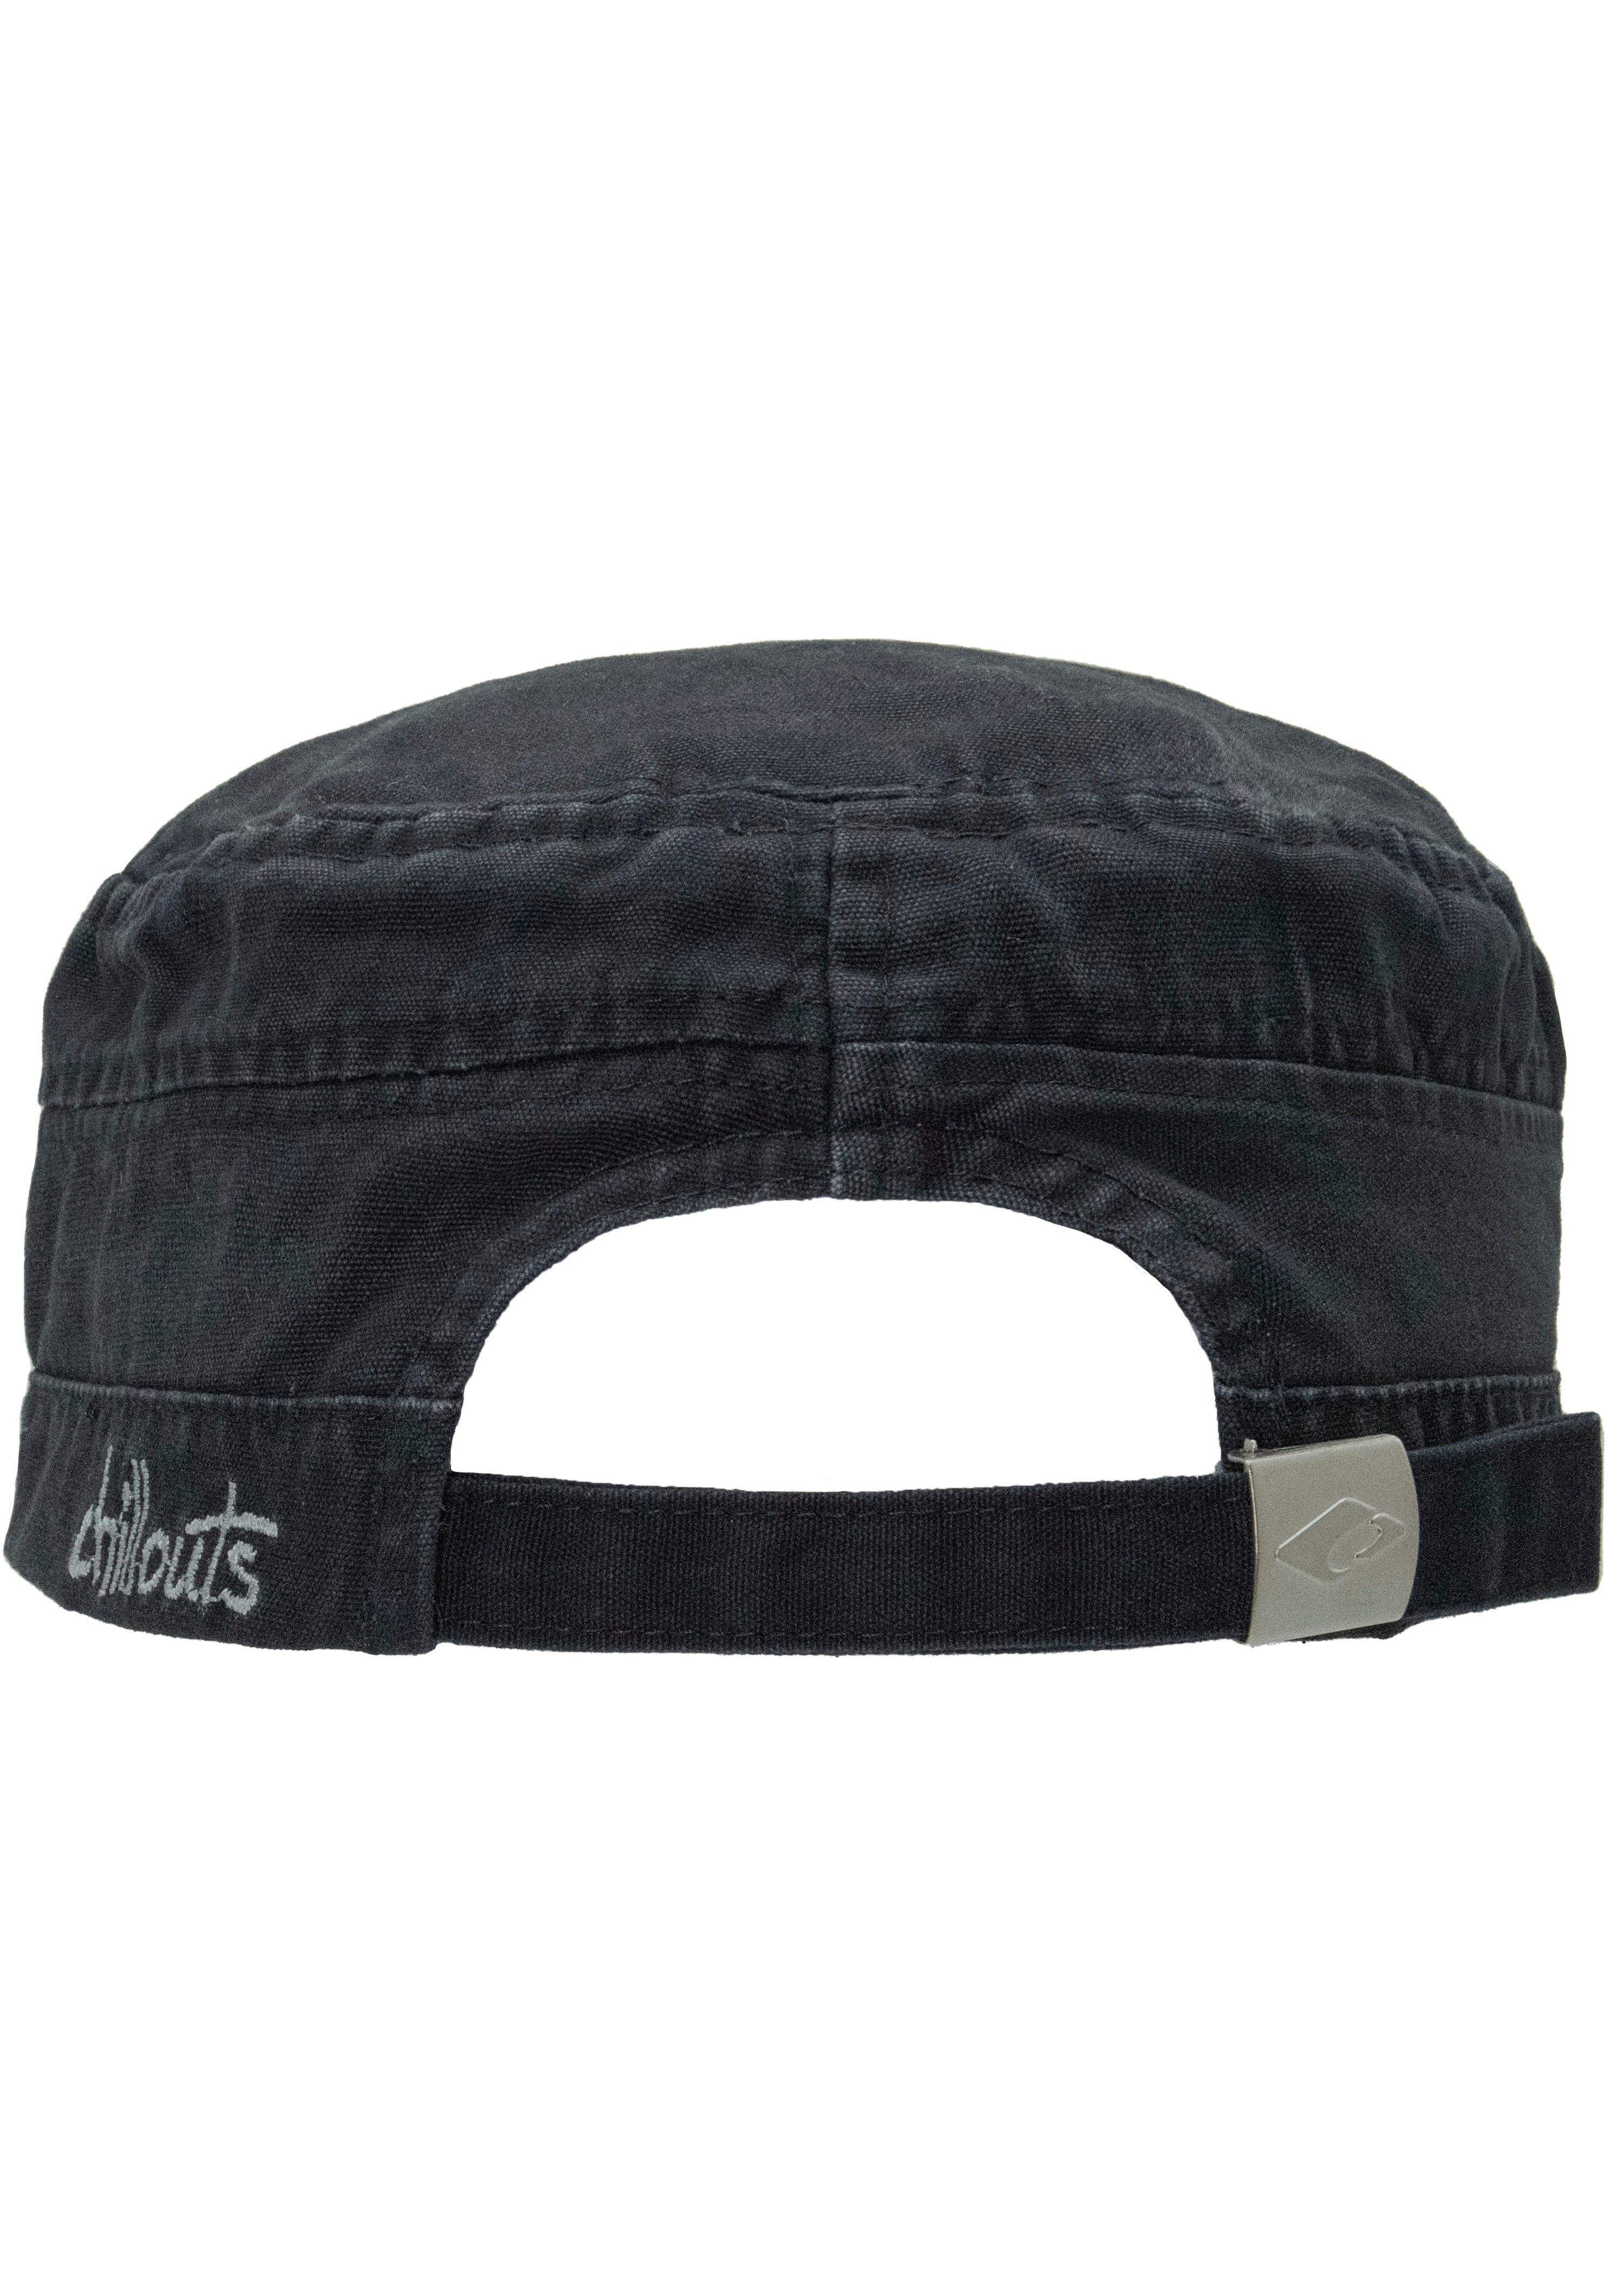 Size Baumwolle, chillouts navy Hat aus El Army atmungsaktiv, reiner washed One Cap Paso